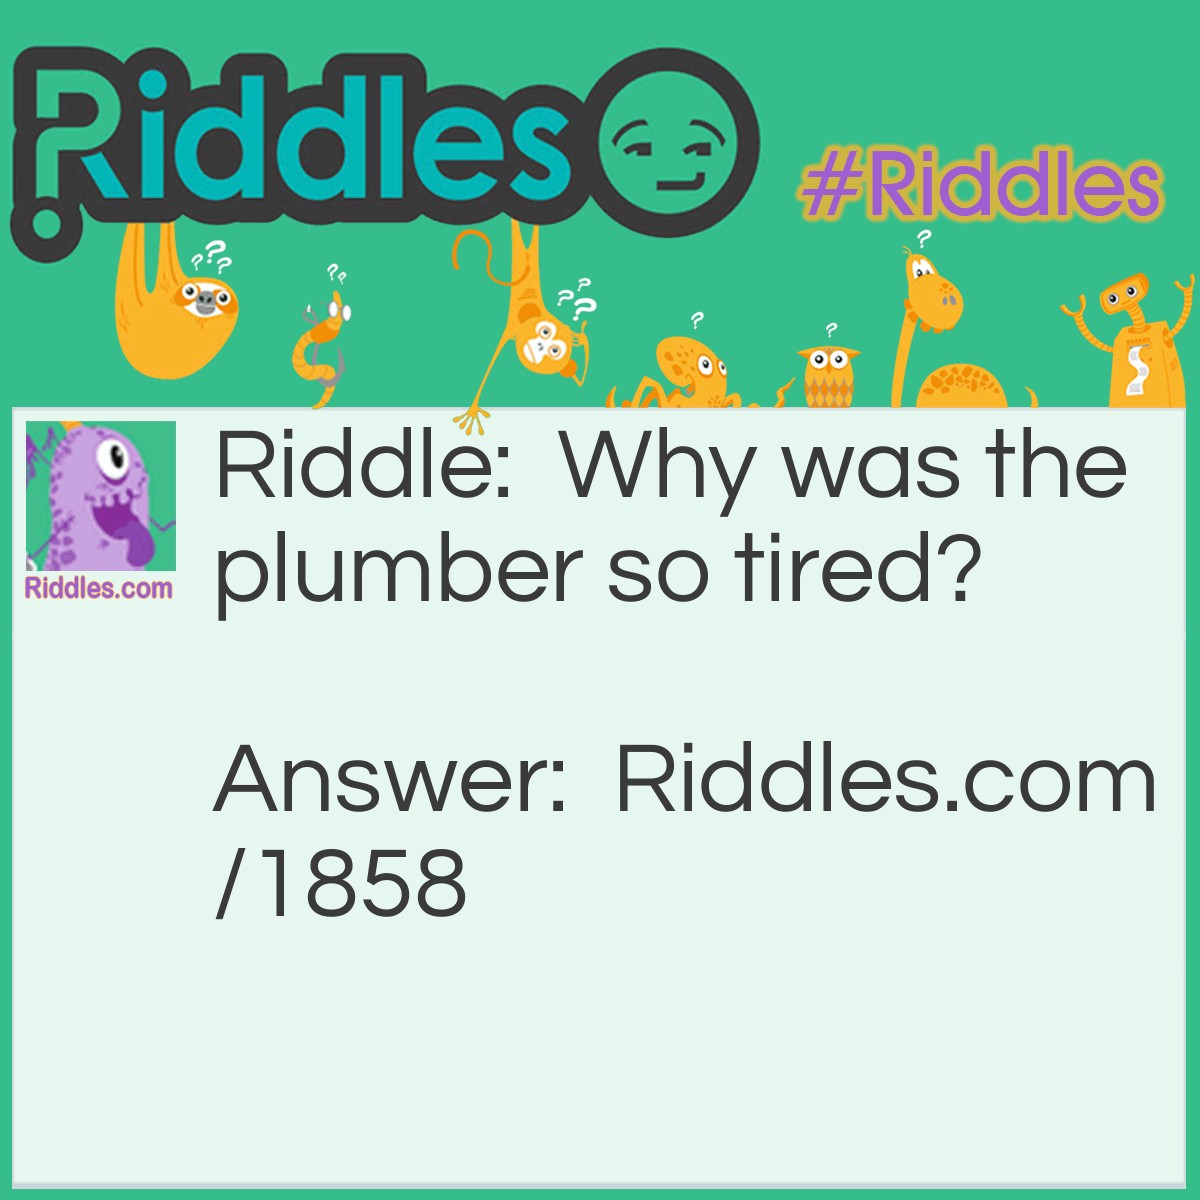 Riddle: Why was the plumber so tired? Answer: He was drained.